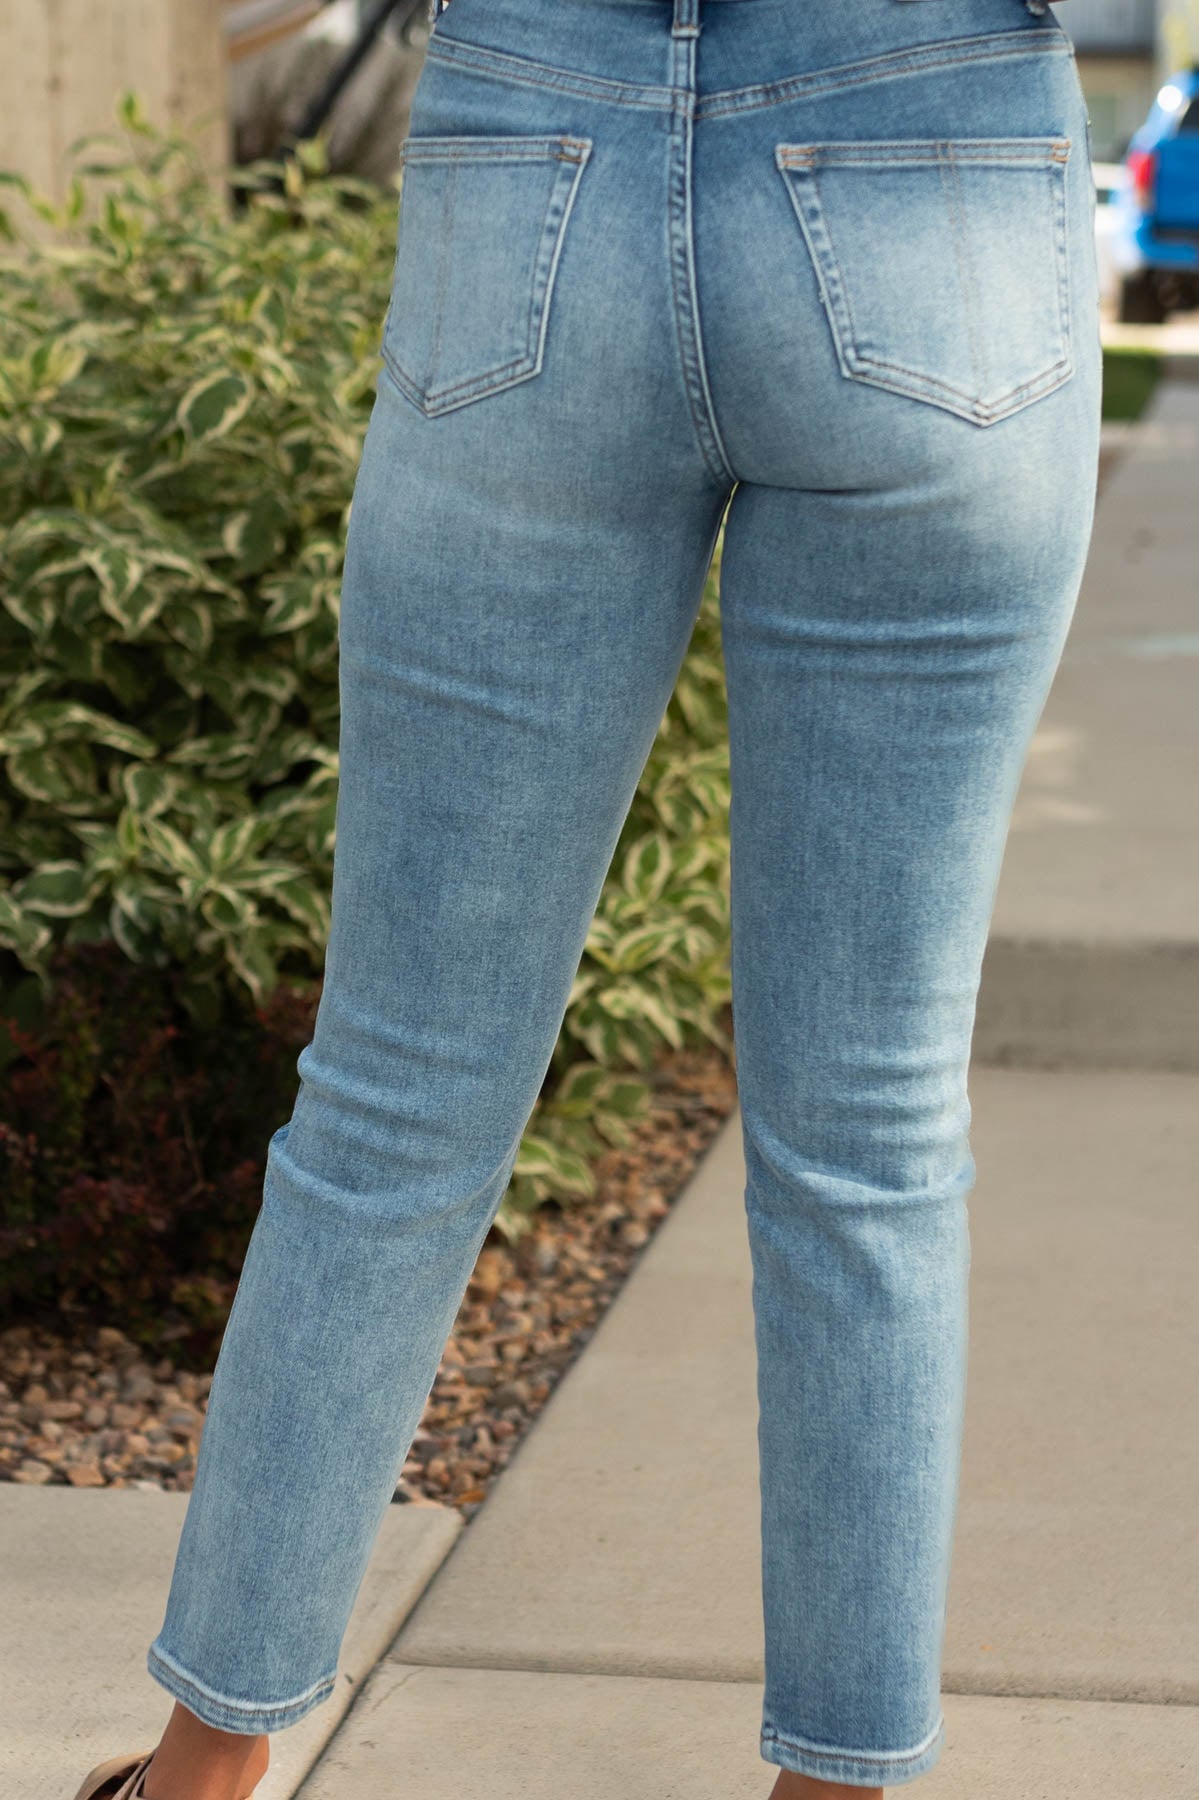 Back view of light girlfriend jeans